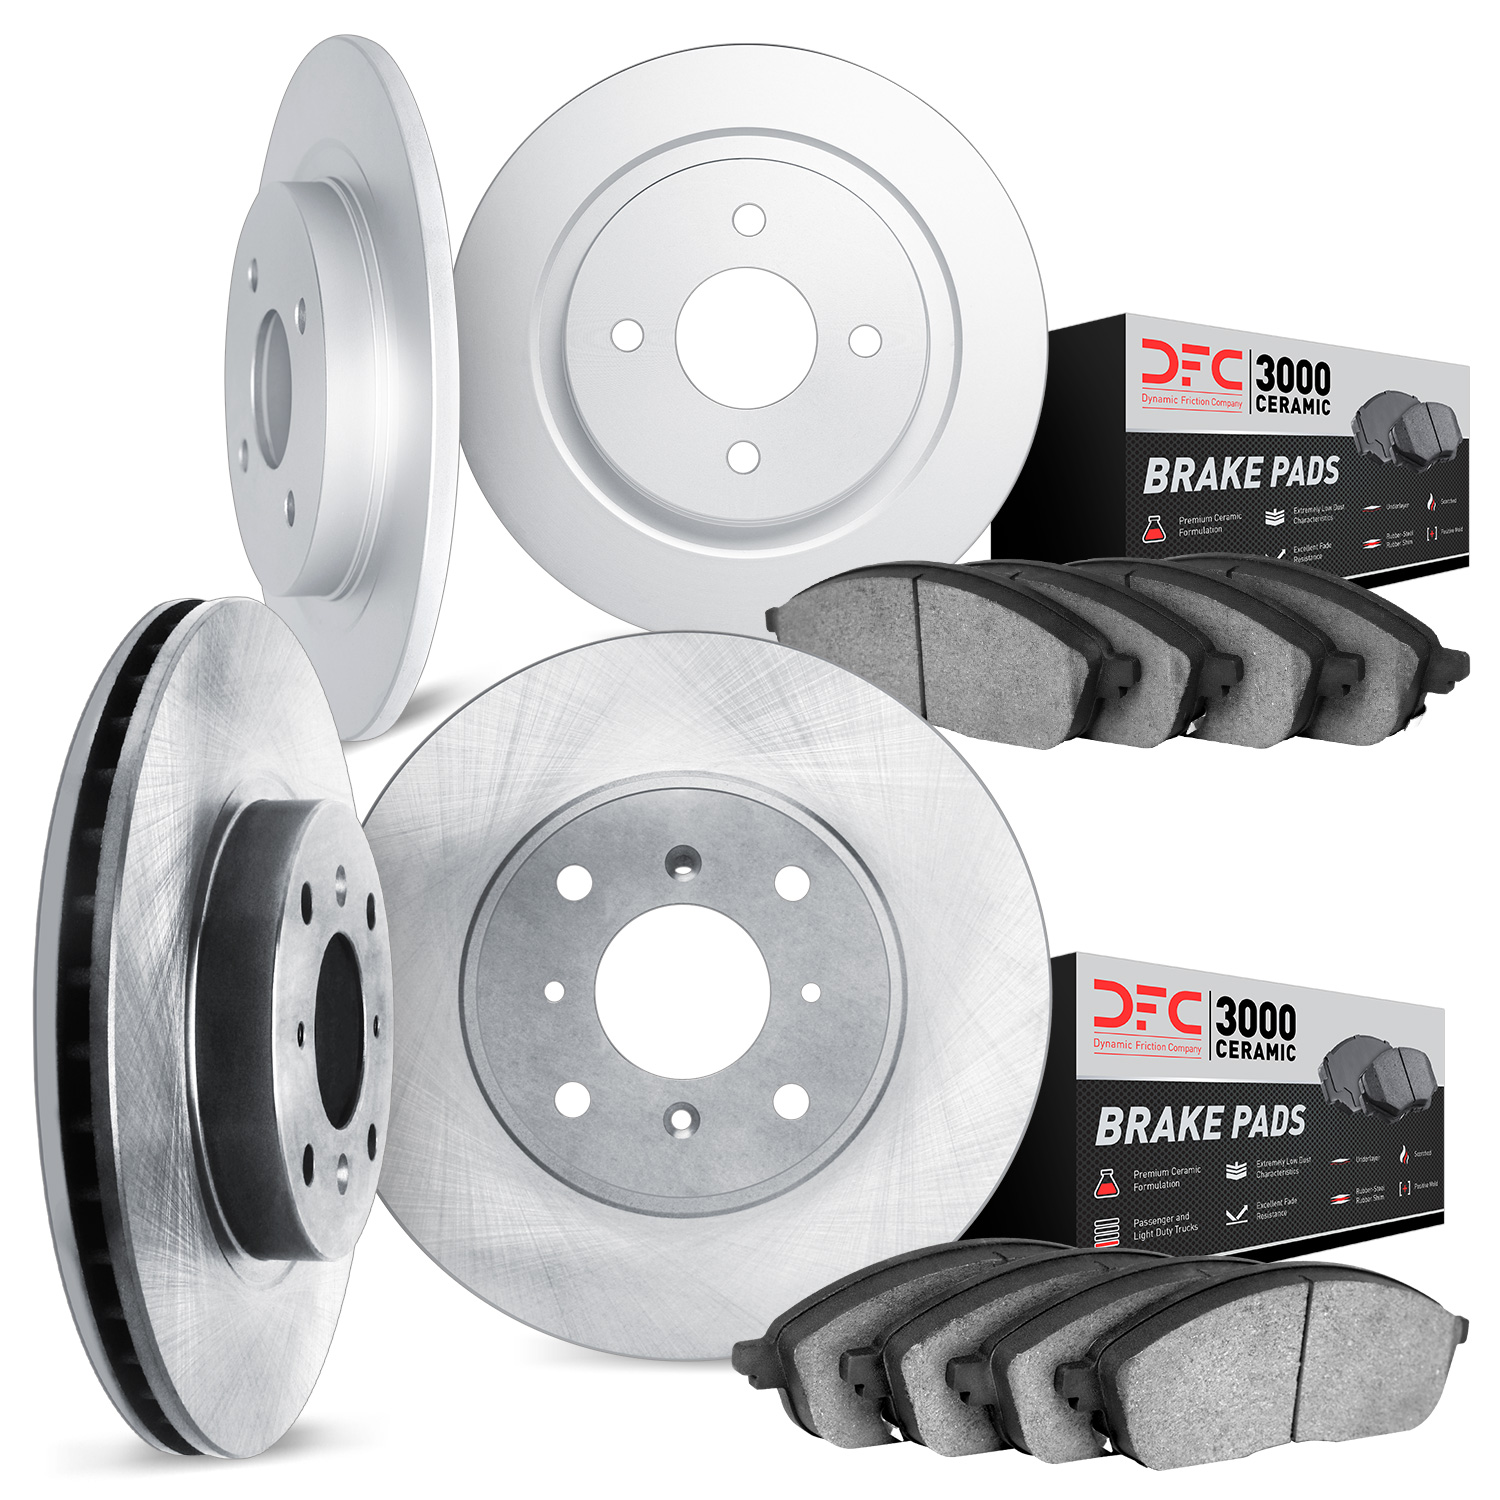 6304-01006 Brake Rotors with 3000-Series Ceramic Brake Pads Kit, 2004-2009 Multiple Makes/Models, Position: Front and Rear